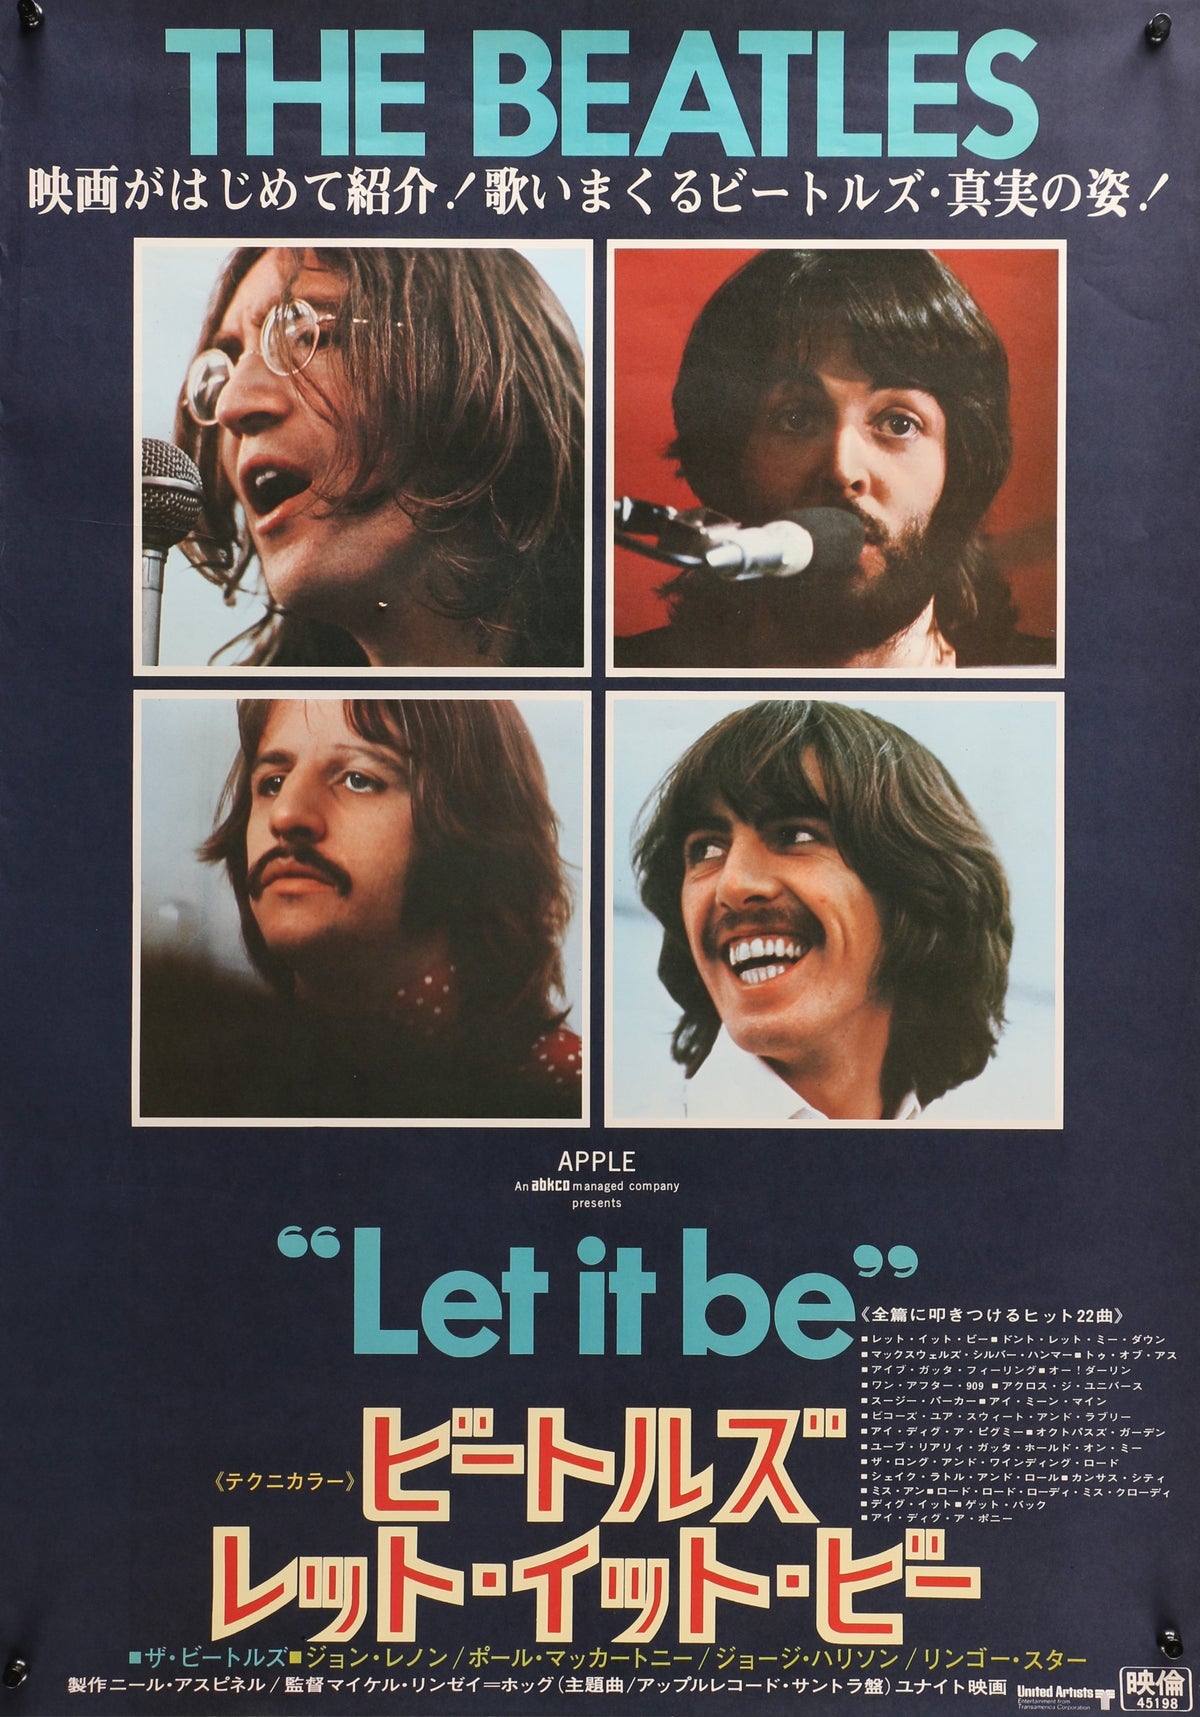 The Beatles- Let it Be - Authentic Vintage Poster